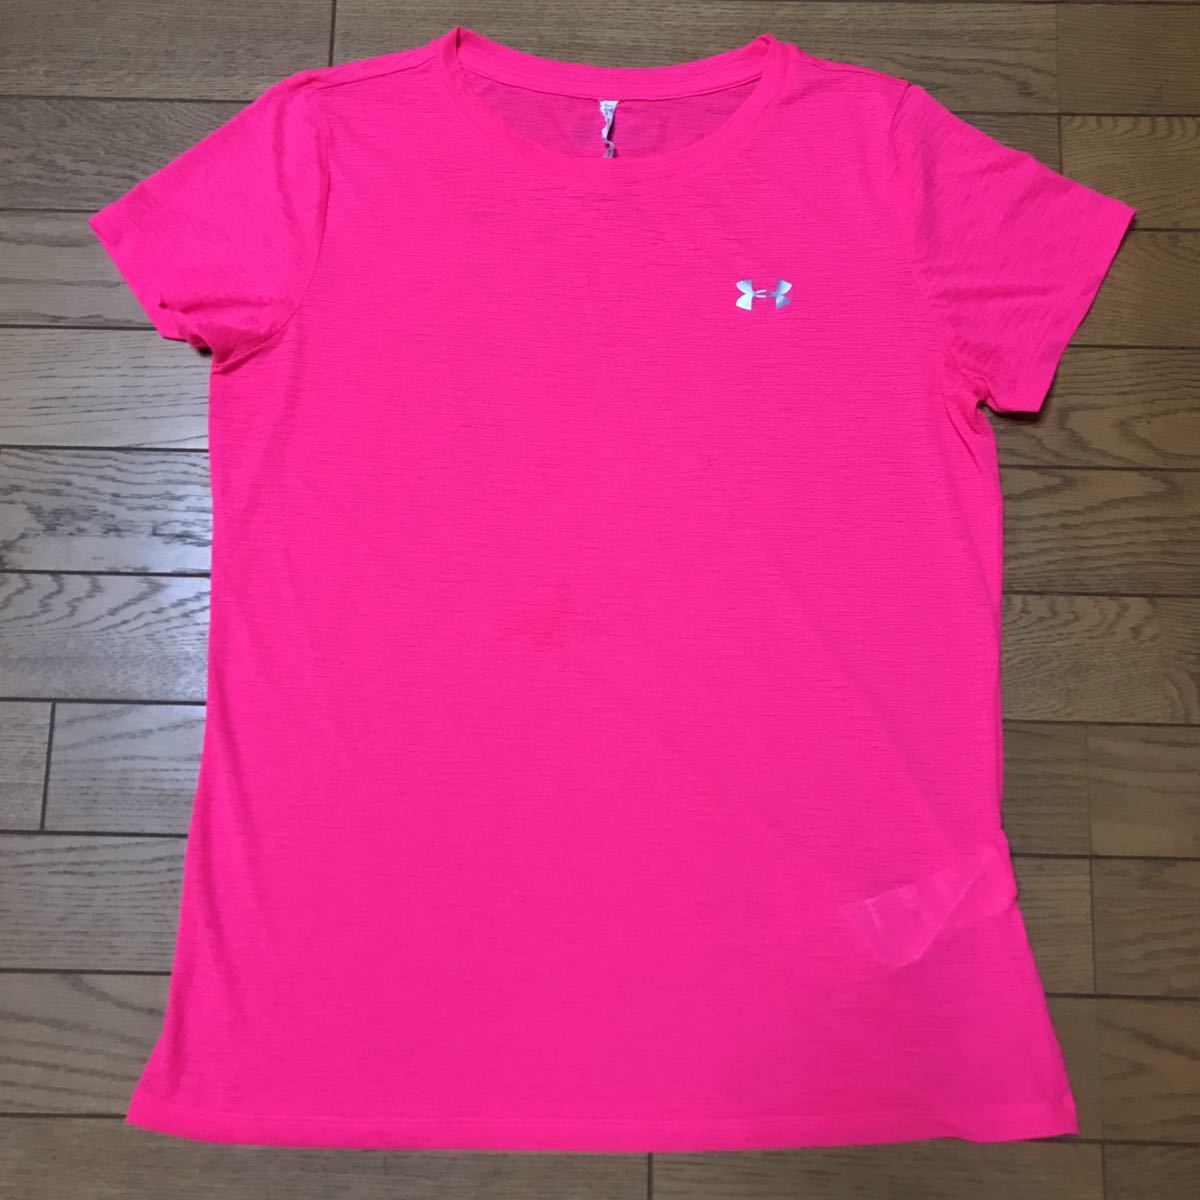 UNDER ARMOUR WOMEN’S RUNNING SHORT SLEEVE T-SHIRTS size-MD 中古 送料無料 NCNR